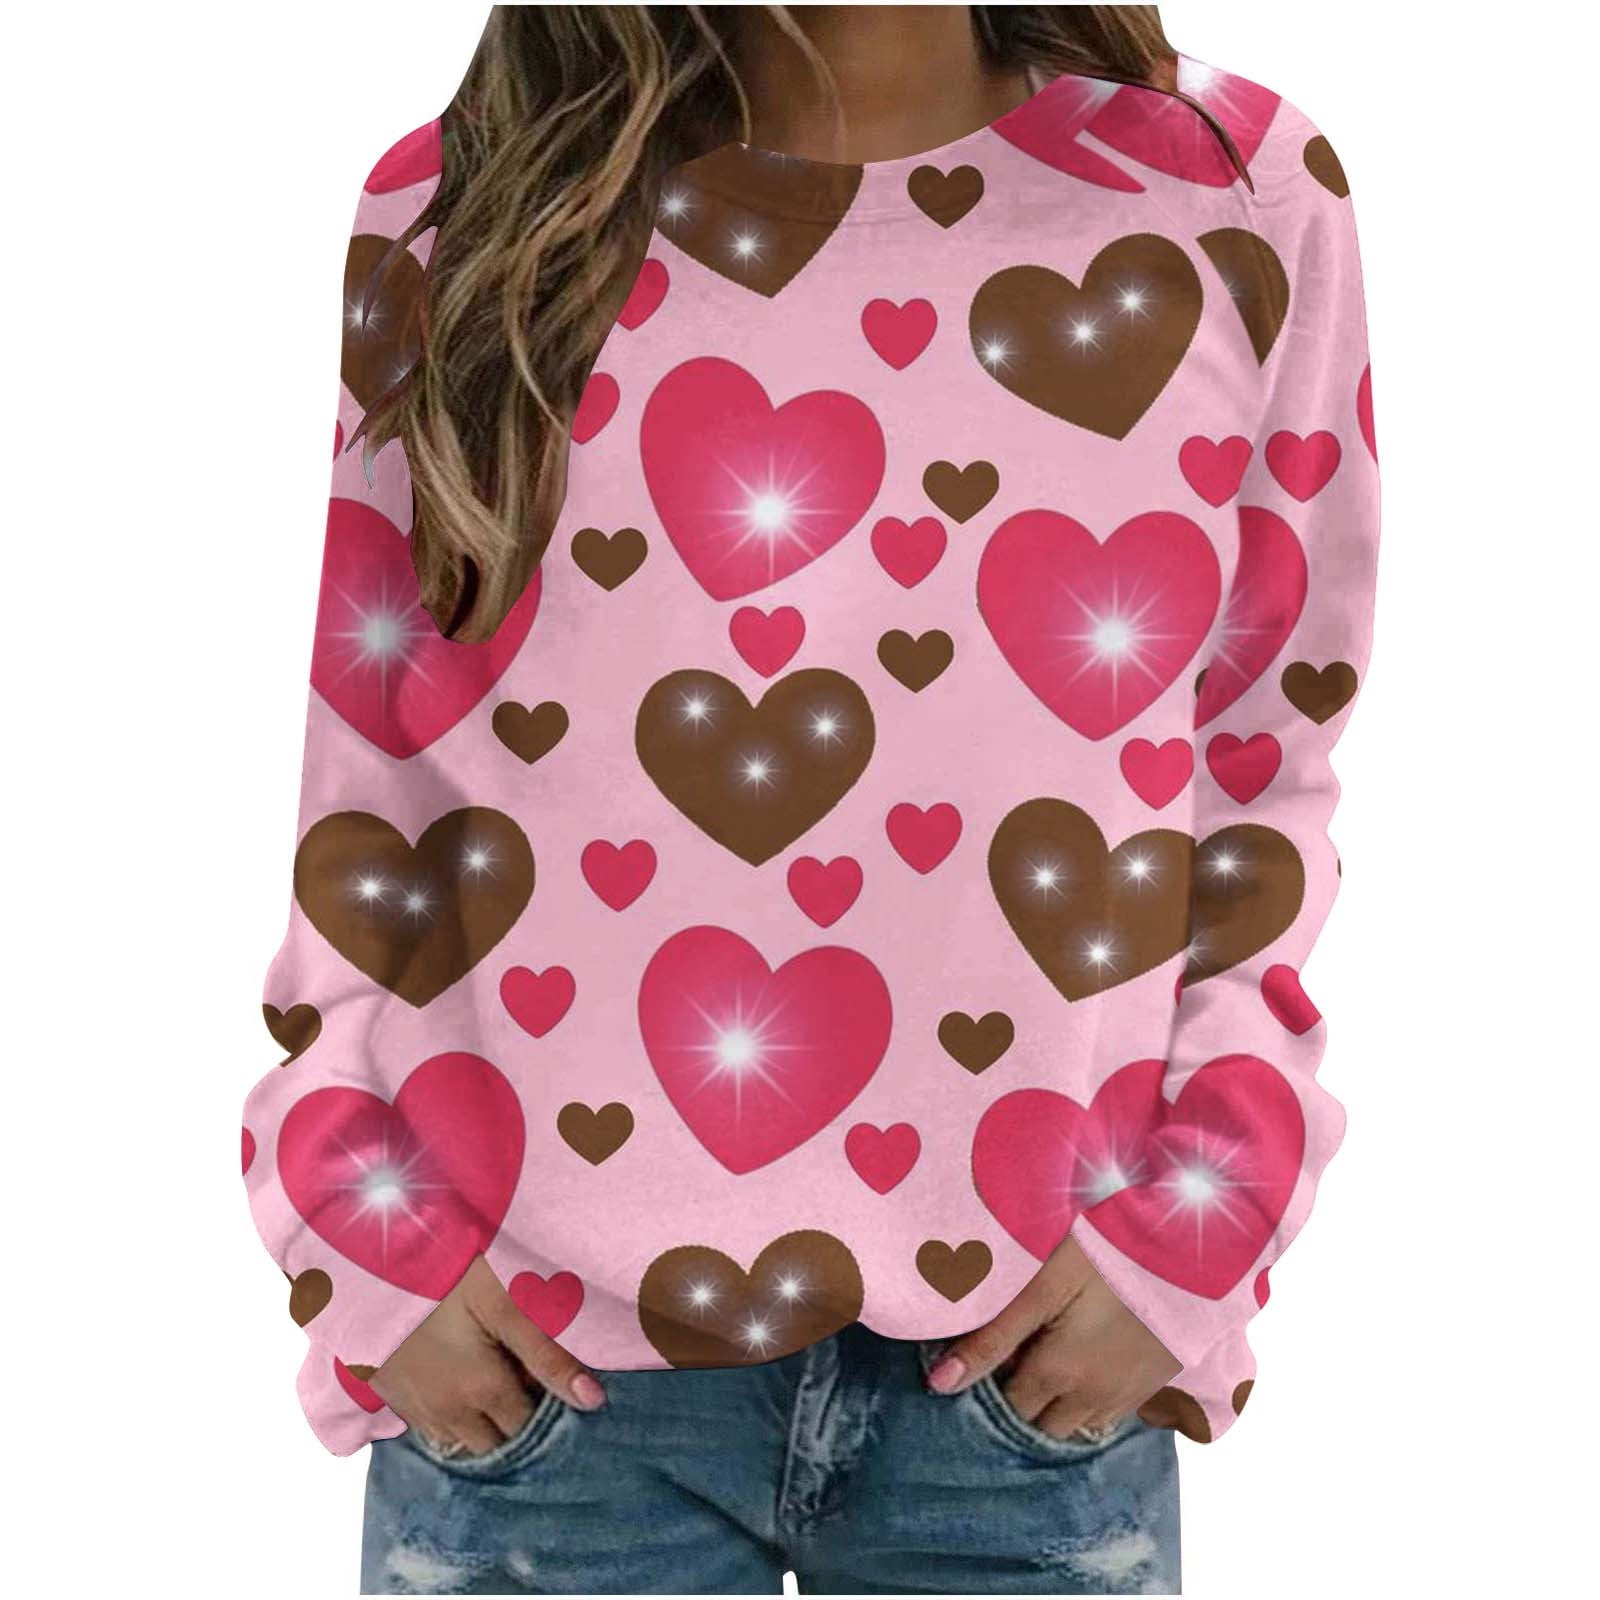 hxshgdsn Valentine's Day Long Sleeve Shirts for Women Trendy Sequin Heart Print Crew Neck Casual Sweatshirts Casual Tunic Tops(Pink,XXL), Women's